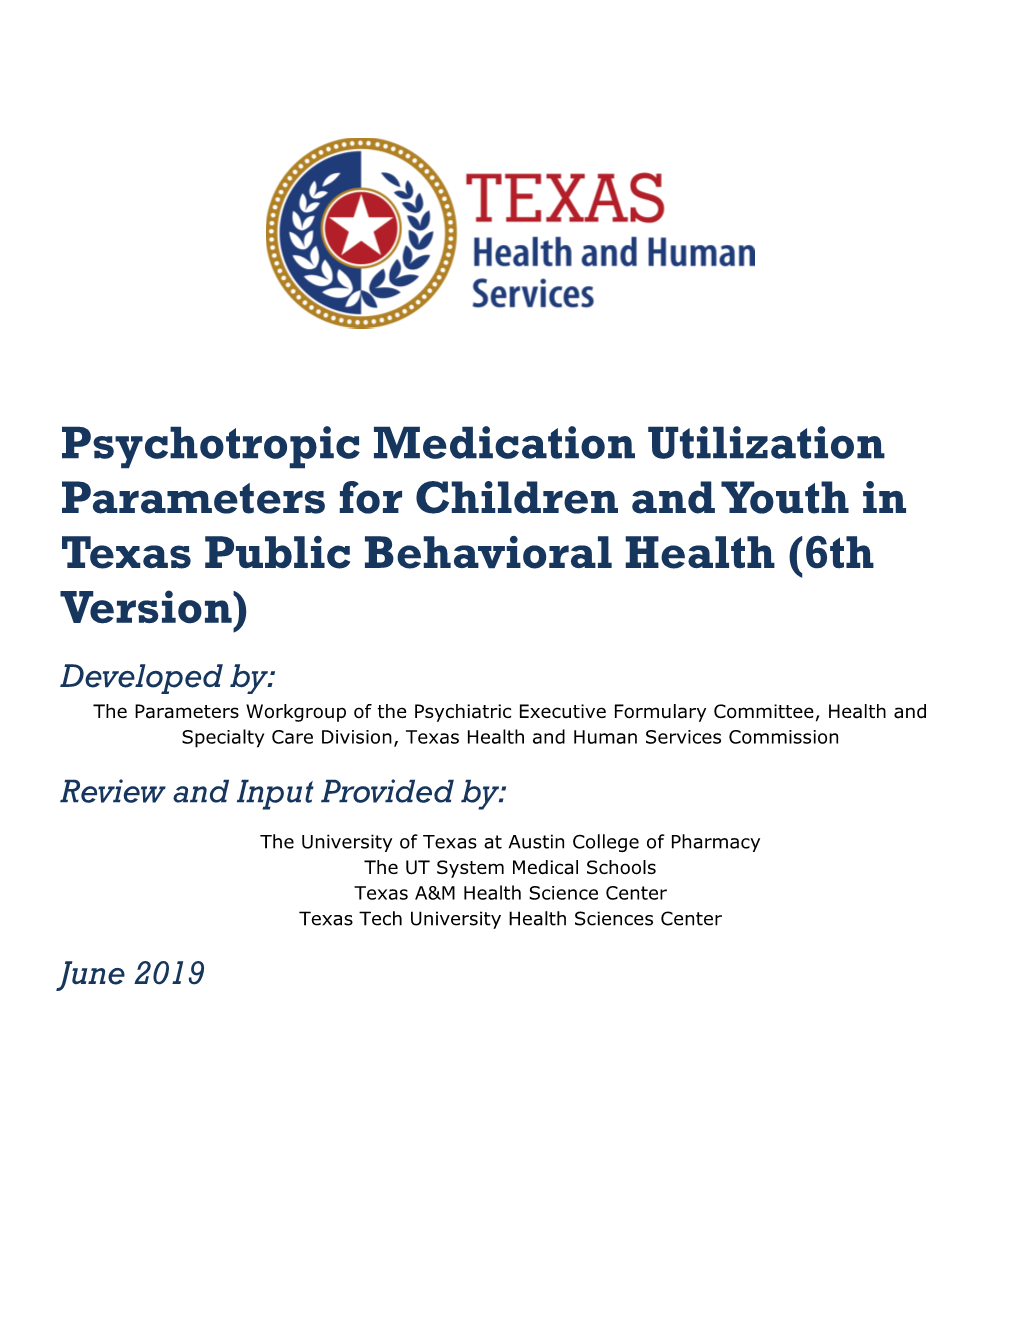 Psychotropic Medication Utilization Parameters for Children and Youth in Behavioral Health